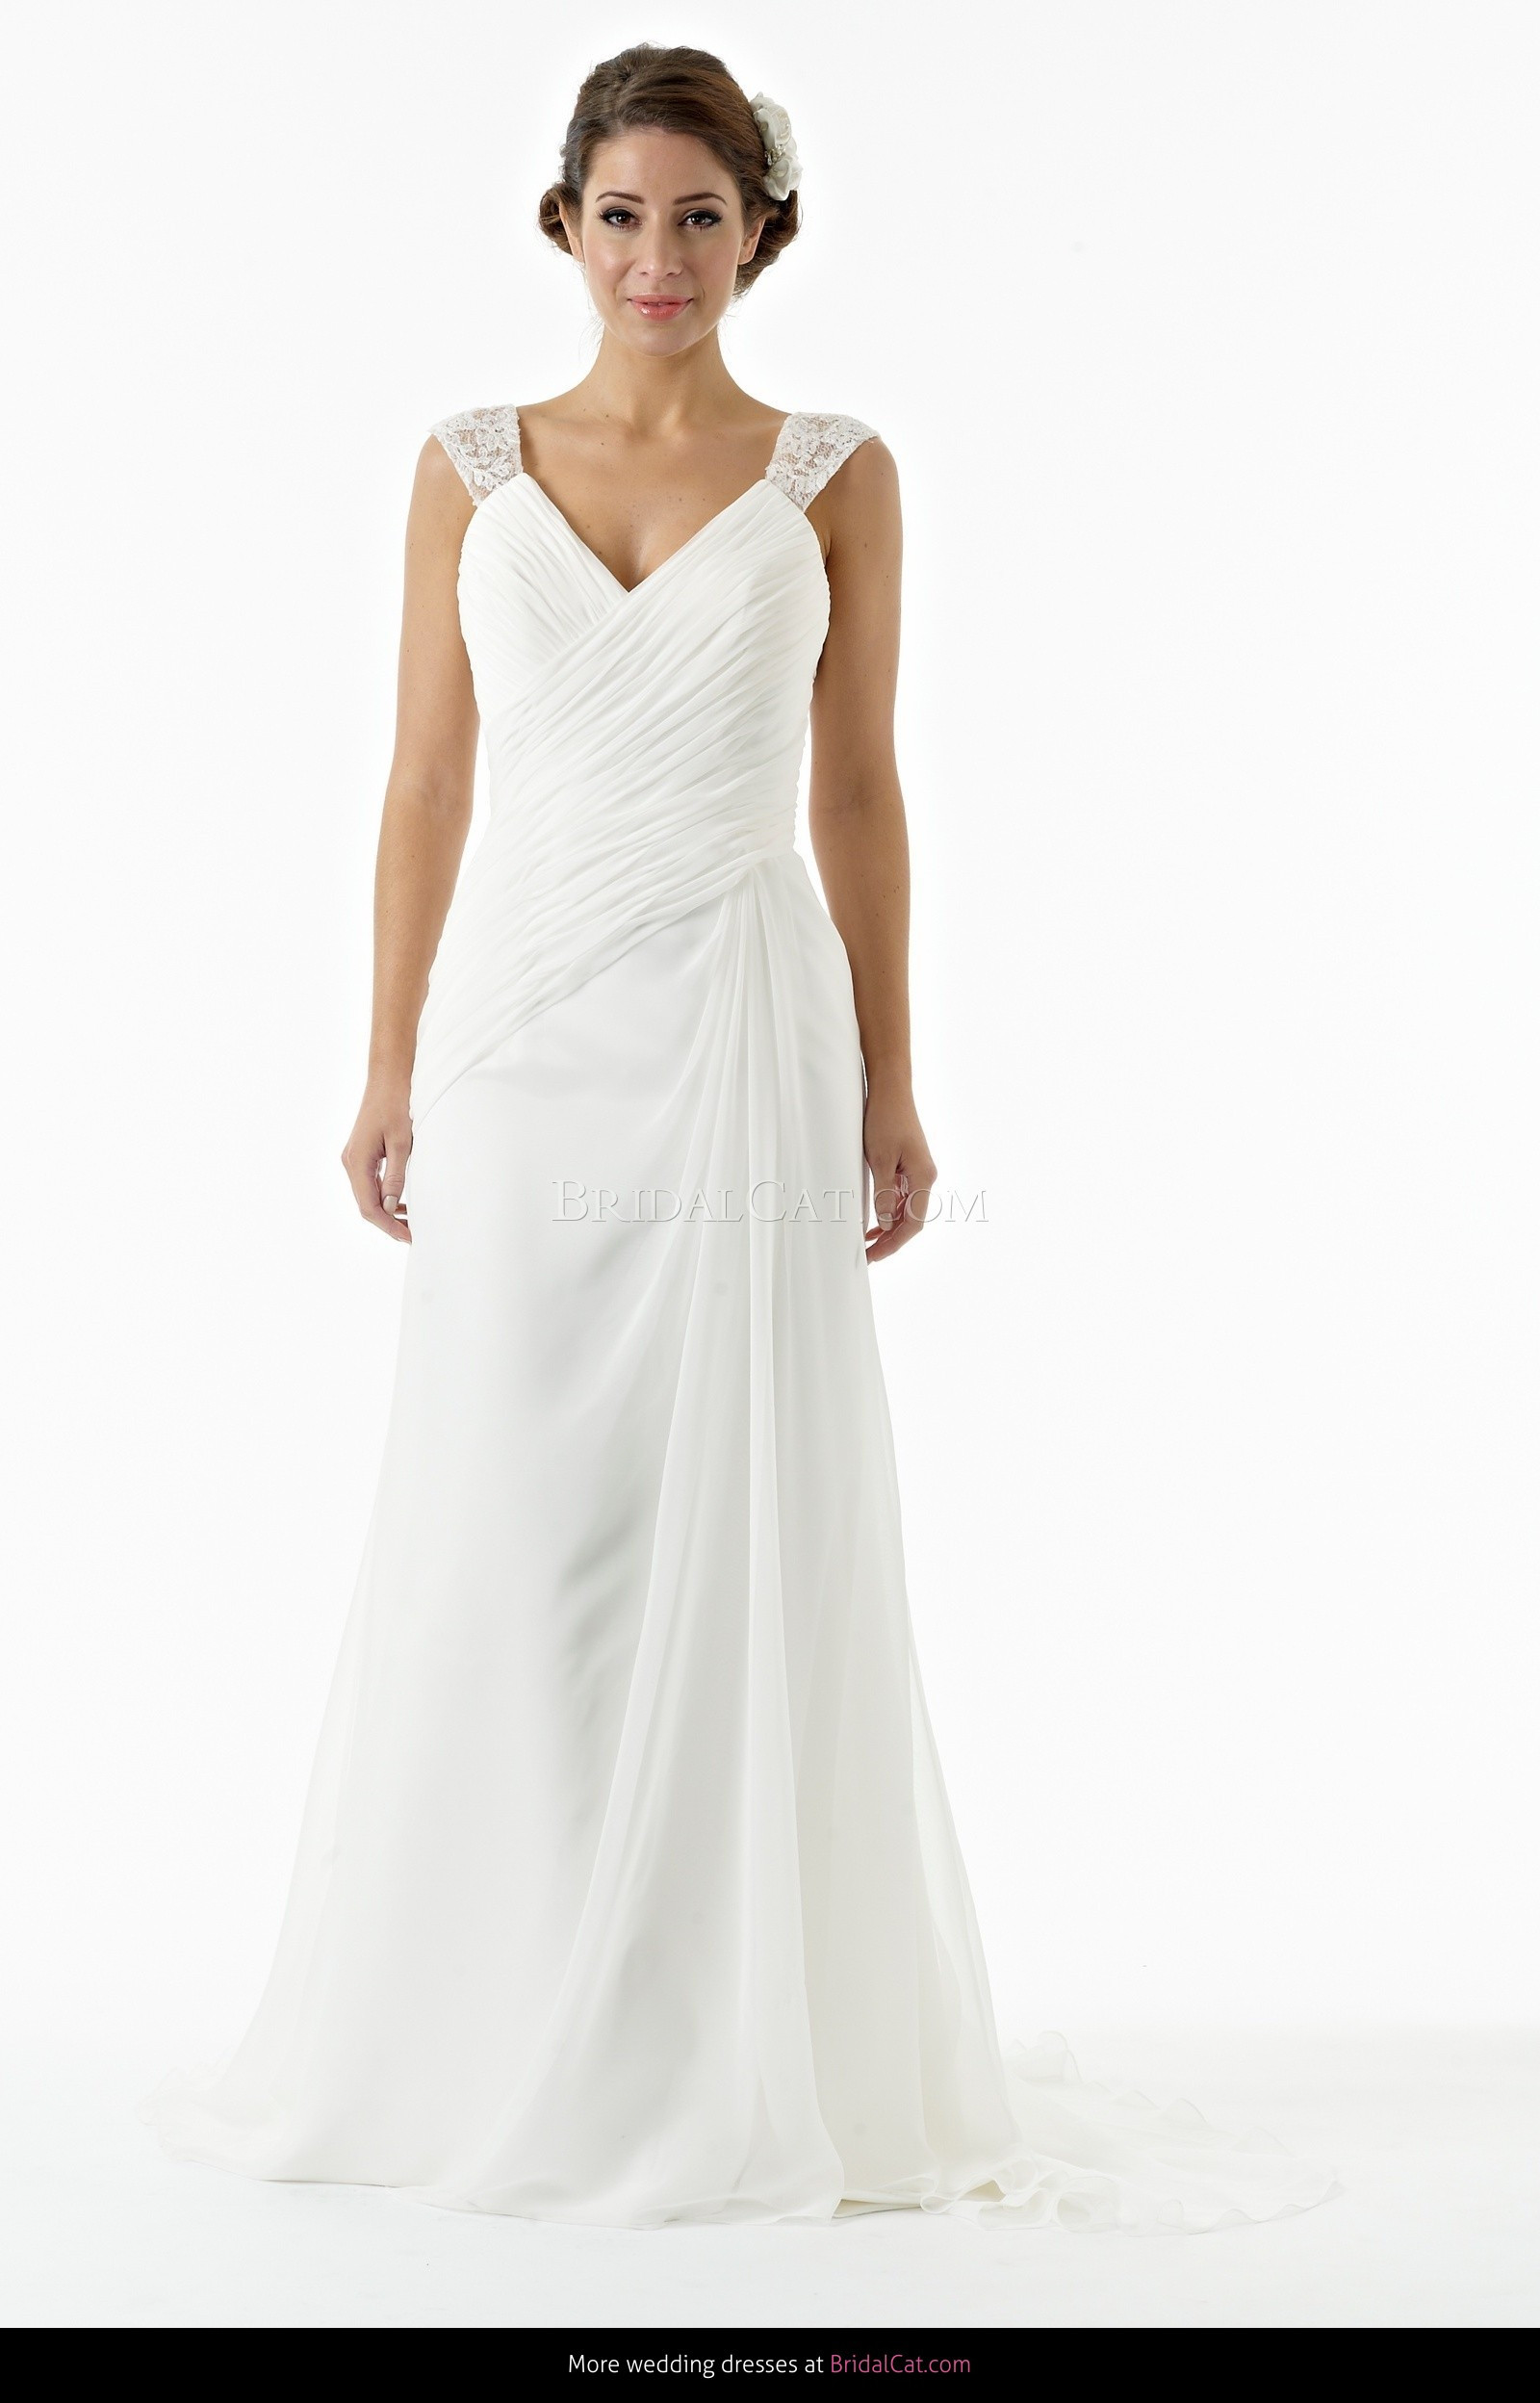 Wedding Dress Consignment Shops
 Consignment shops that wedding dresses